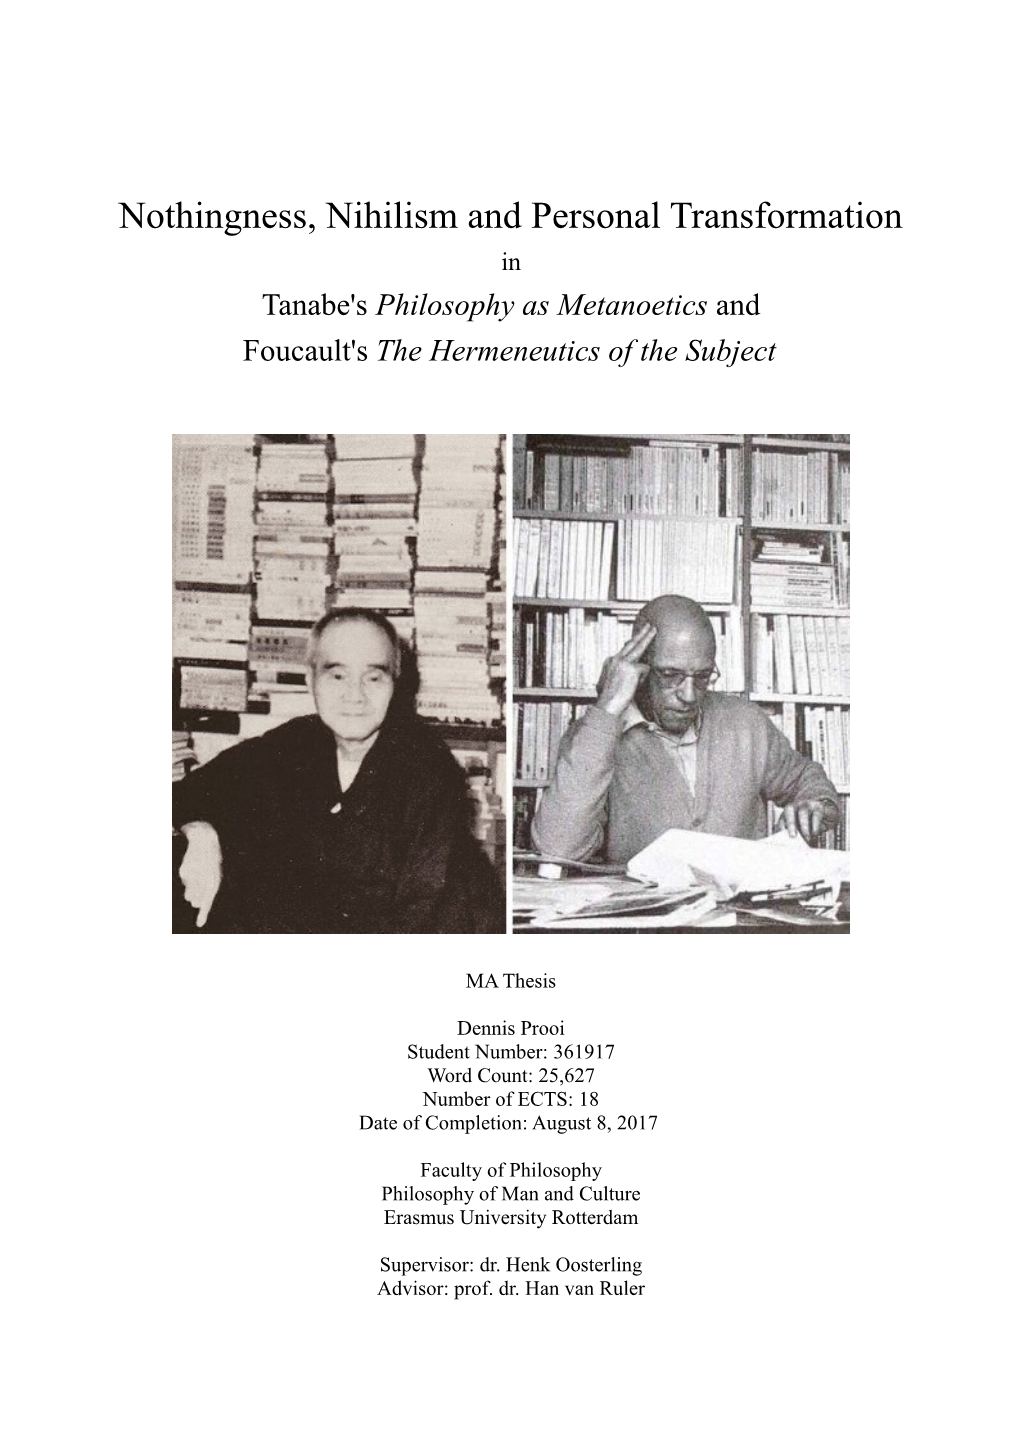 Nothingness, Nihilism and Personal Transformation in Tanabe's Philosophy As Metanoetics and Foucault's the Hermeneutics of the Subject